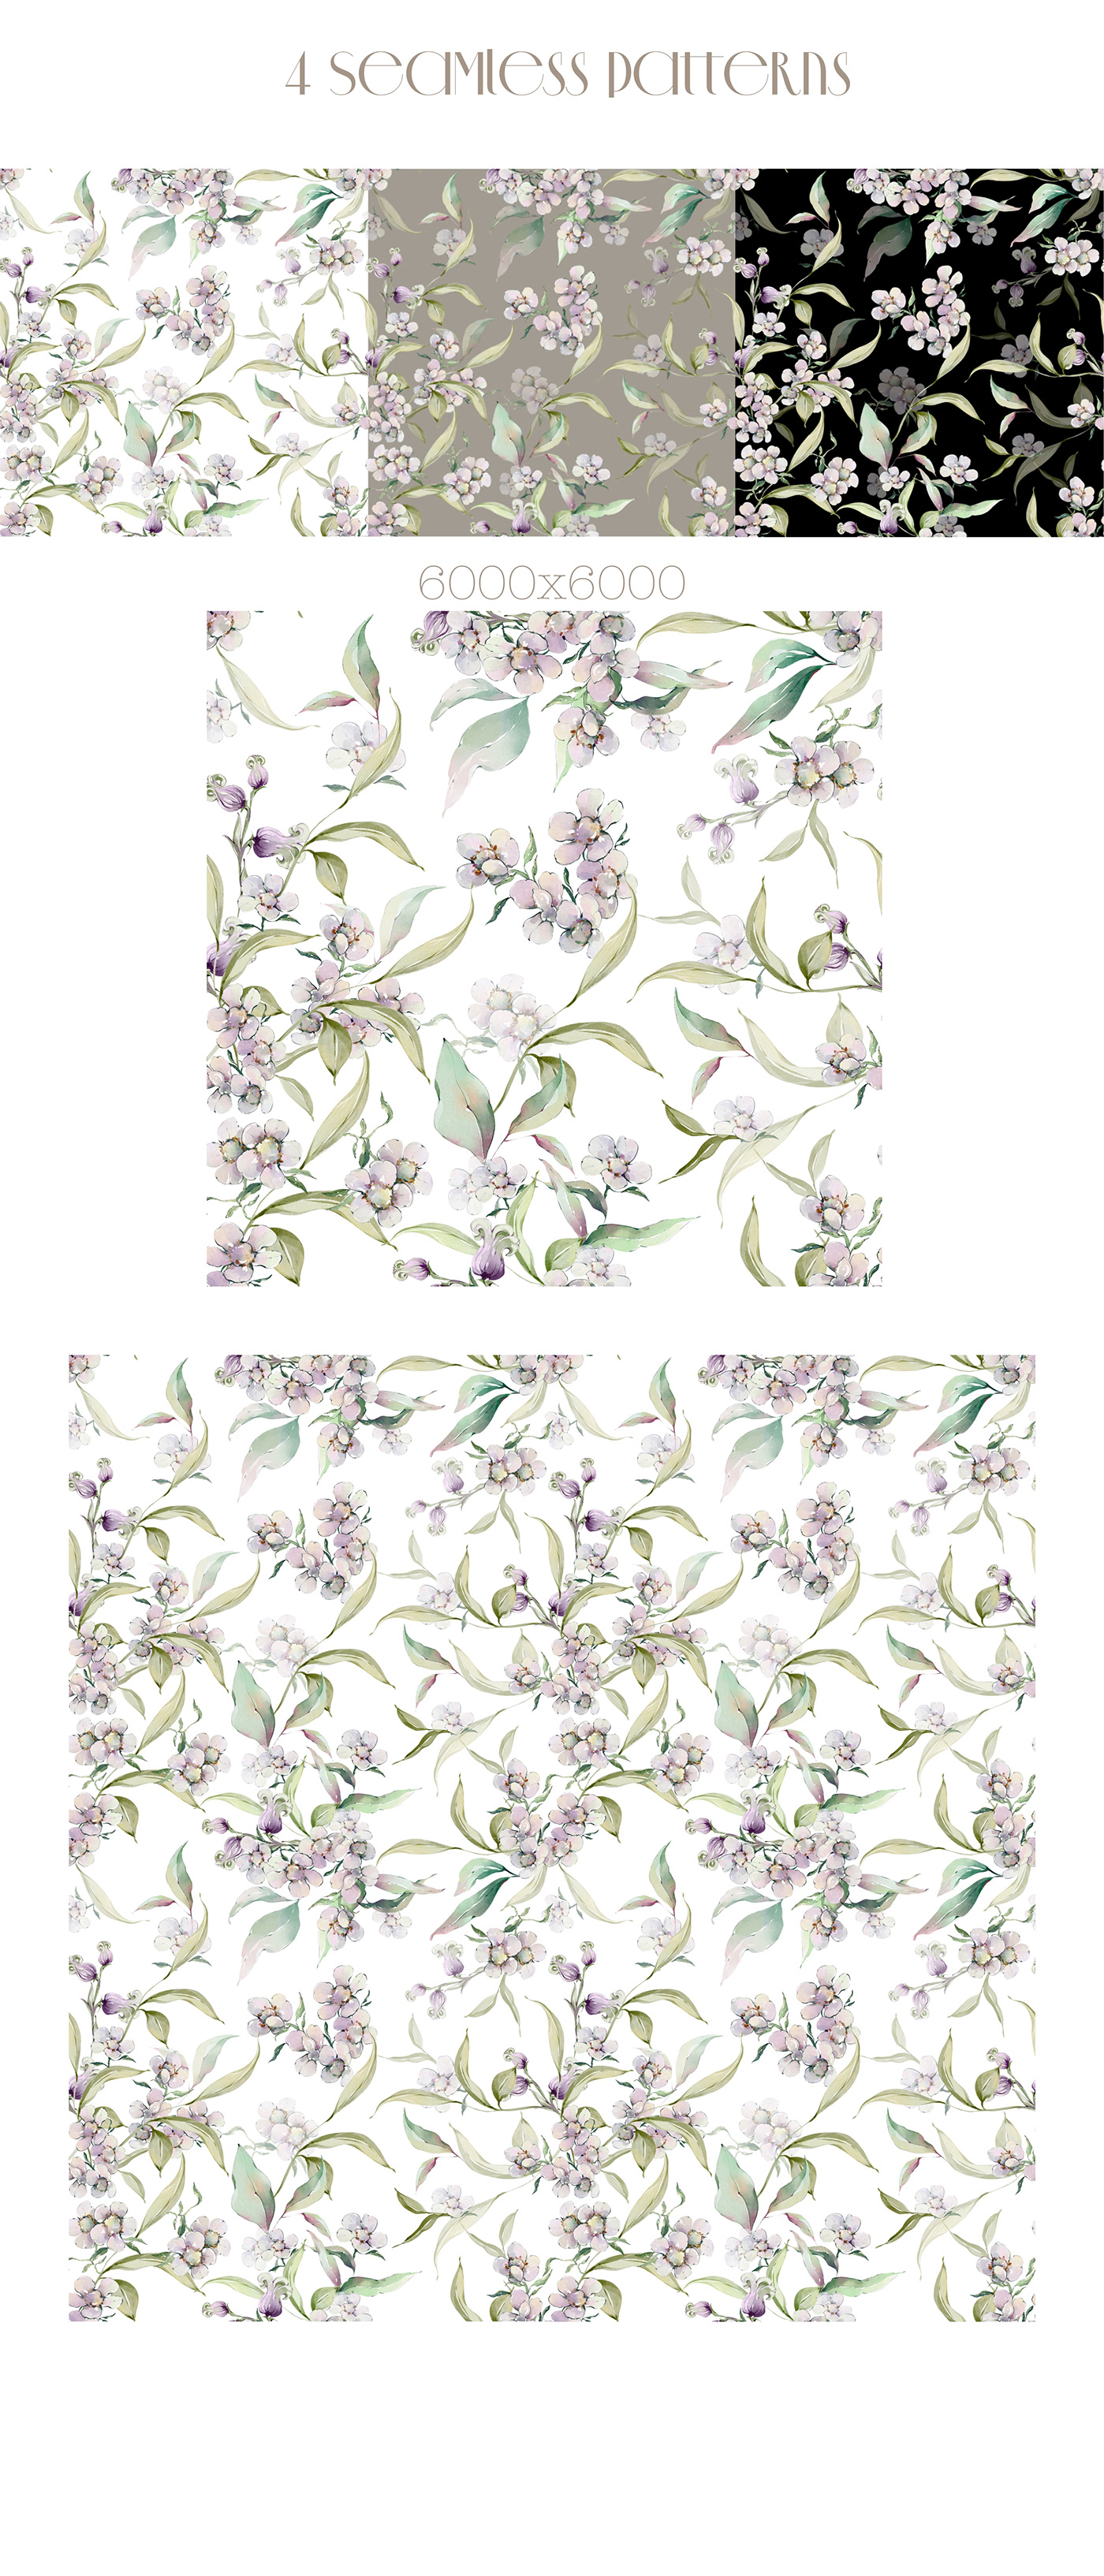 watercolor floral pattern lingerie brand Baby Shower bridal wedding textile fabric pattern